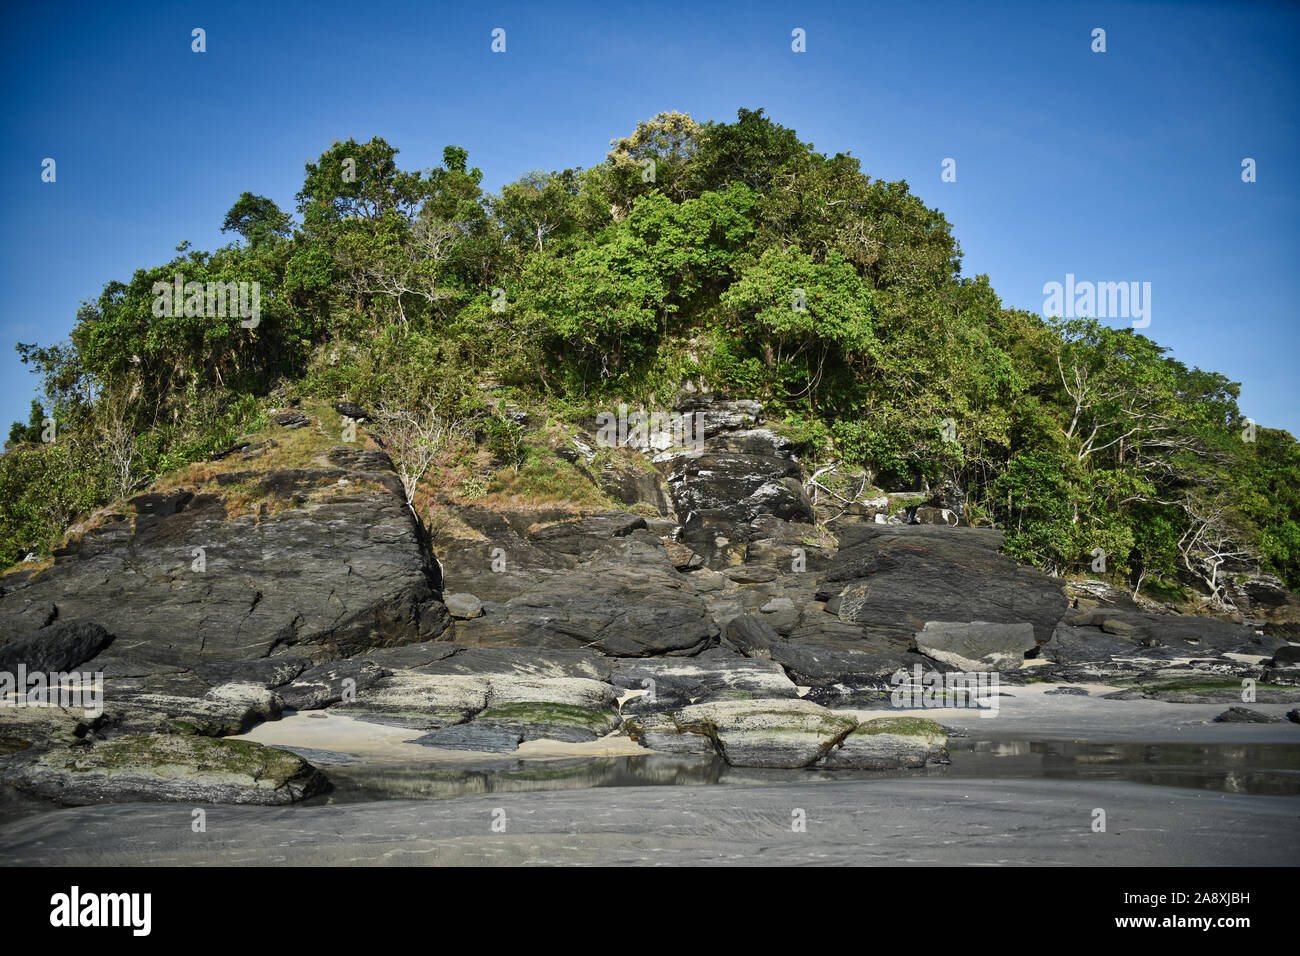 Hillside with black rocks and green trees, plants on the shores of the sandy beautiful exotic and stunning Cenang beach in Langkawi island, in Malaysi Stock Photo